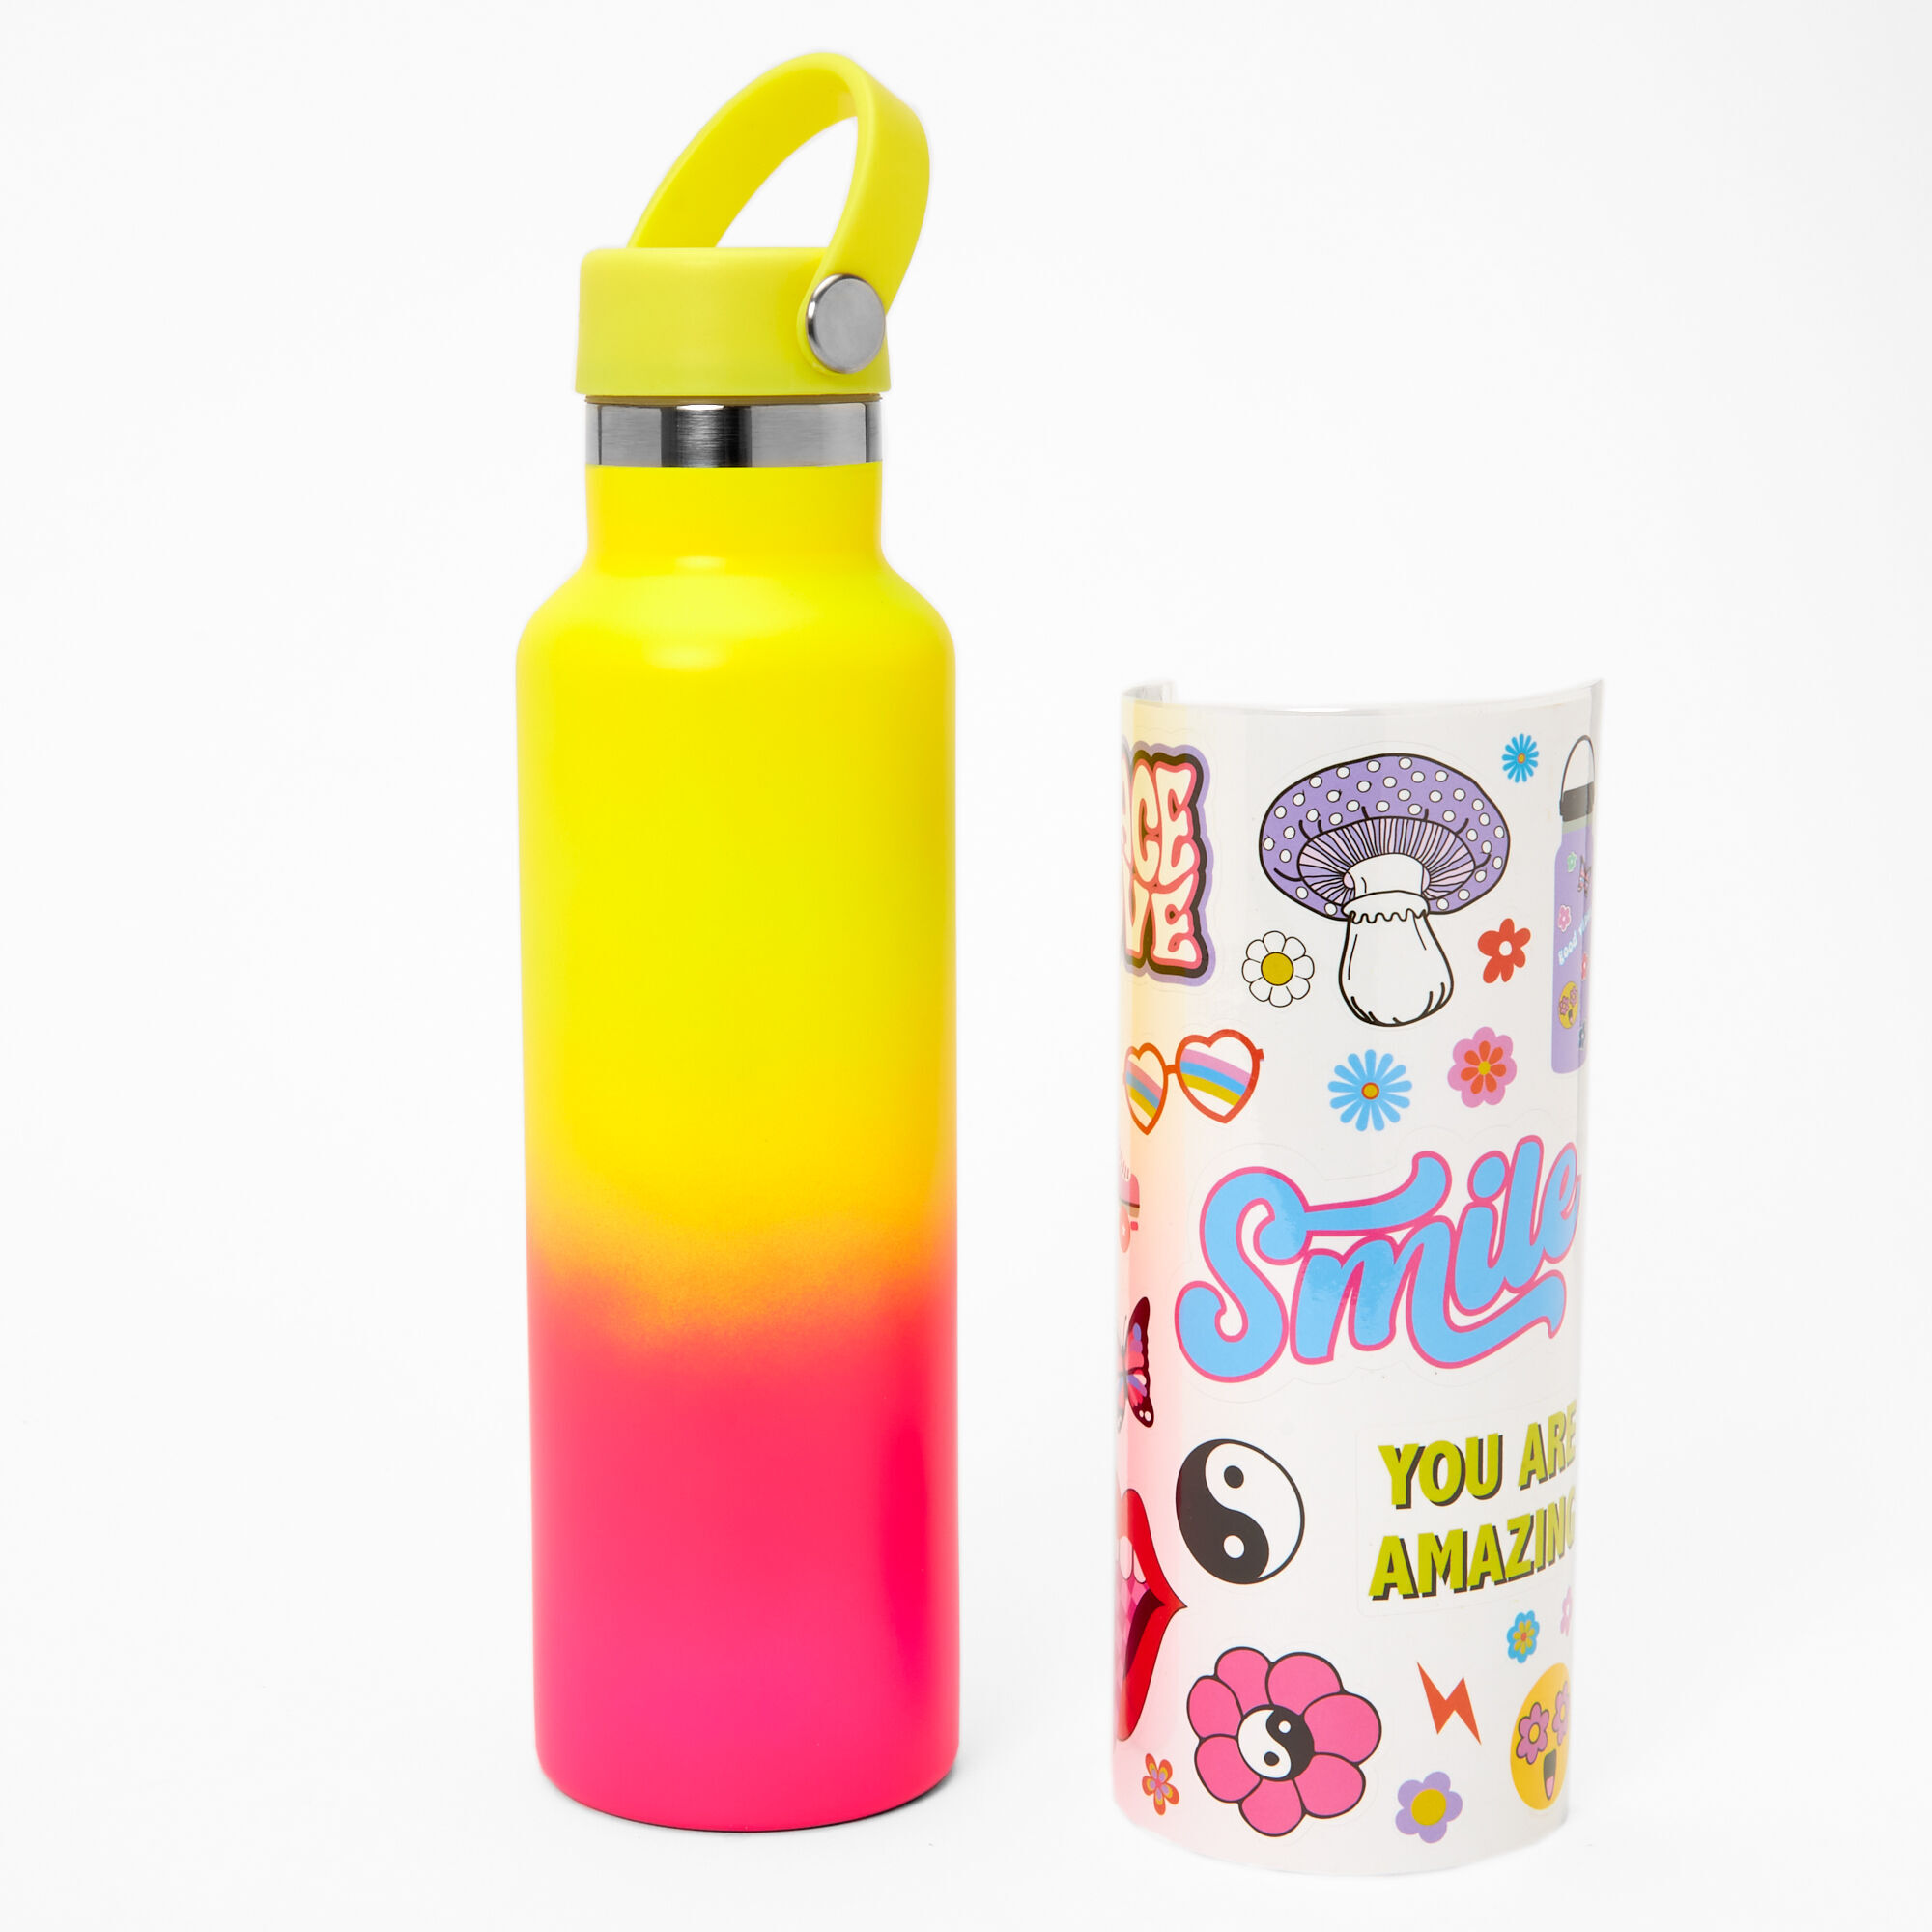 DigHealth Decorate Your Own Water Bottle for Girls with Stickers